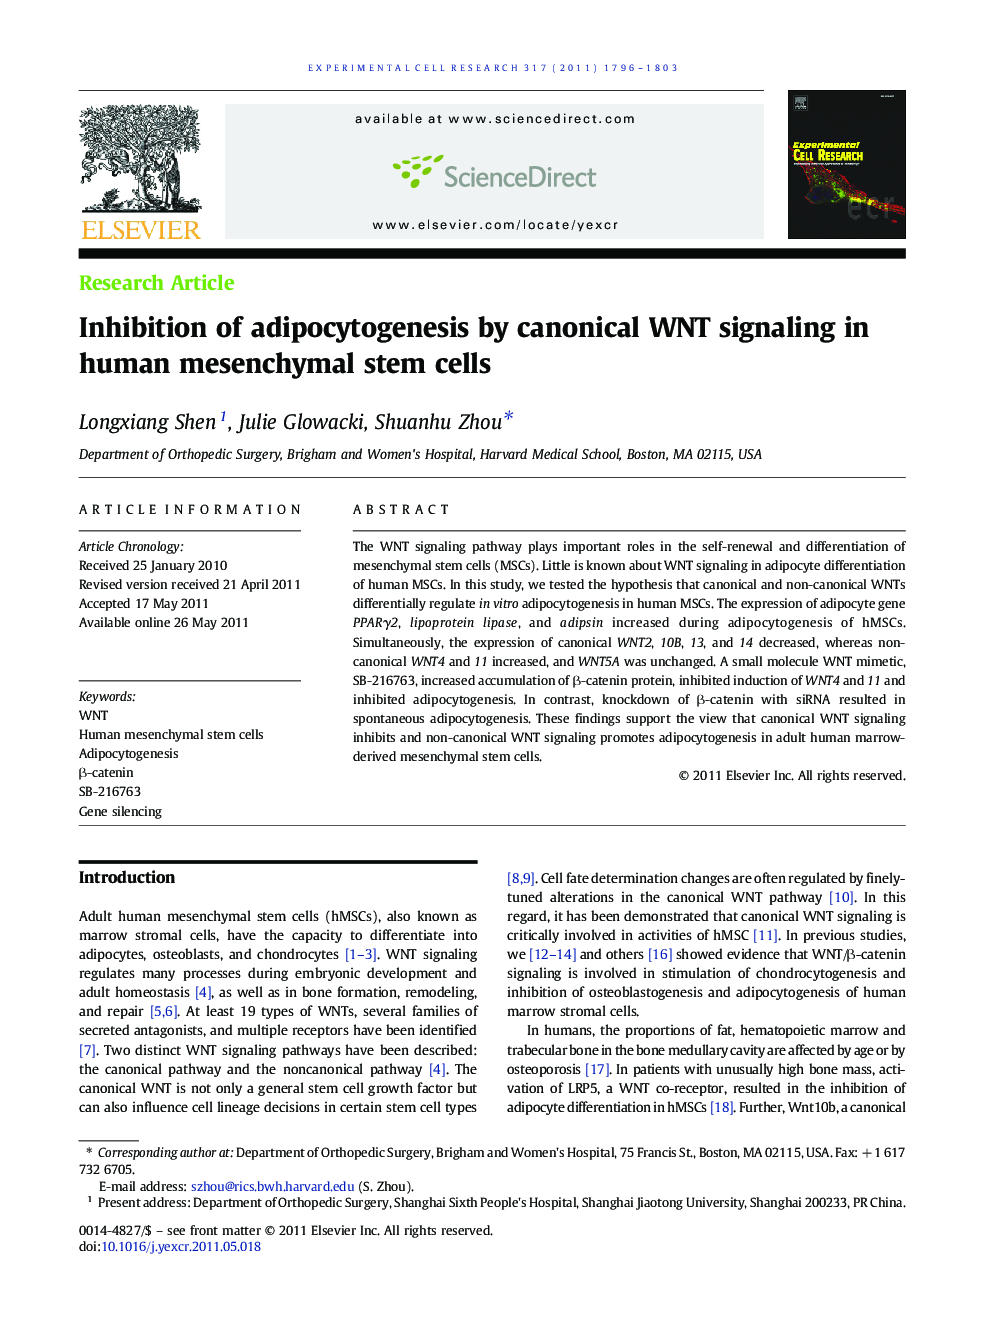 Inhibition of adipocytogenesis by canonical WNT signaling in human mesenchymal stem cells